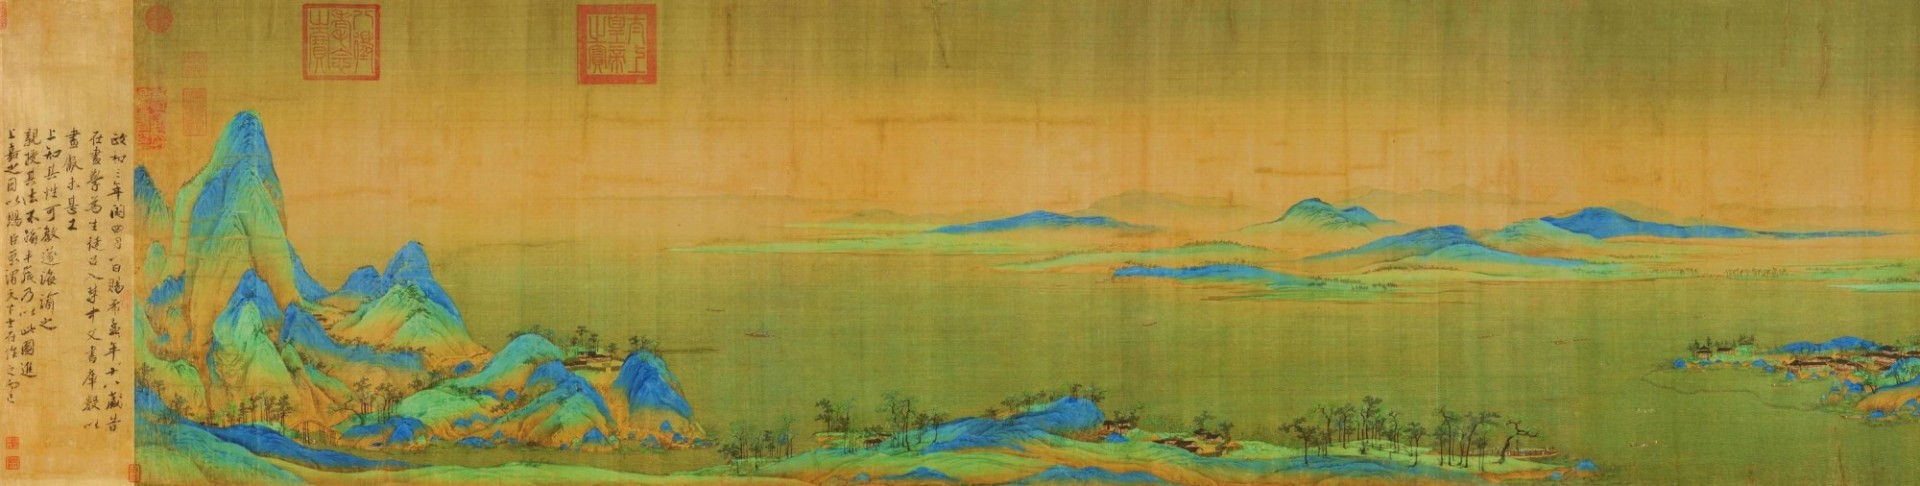 A Thousand Li of Rivers and Mountains, Song Dynasty, Wang Ximeng